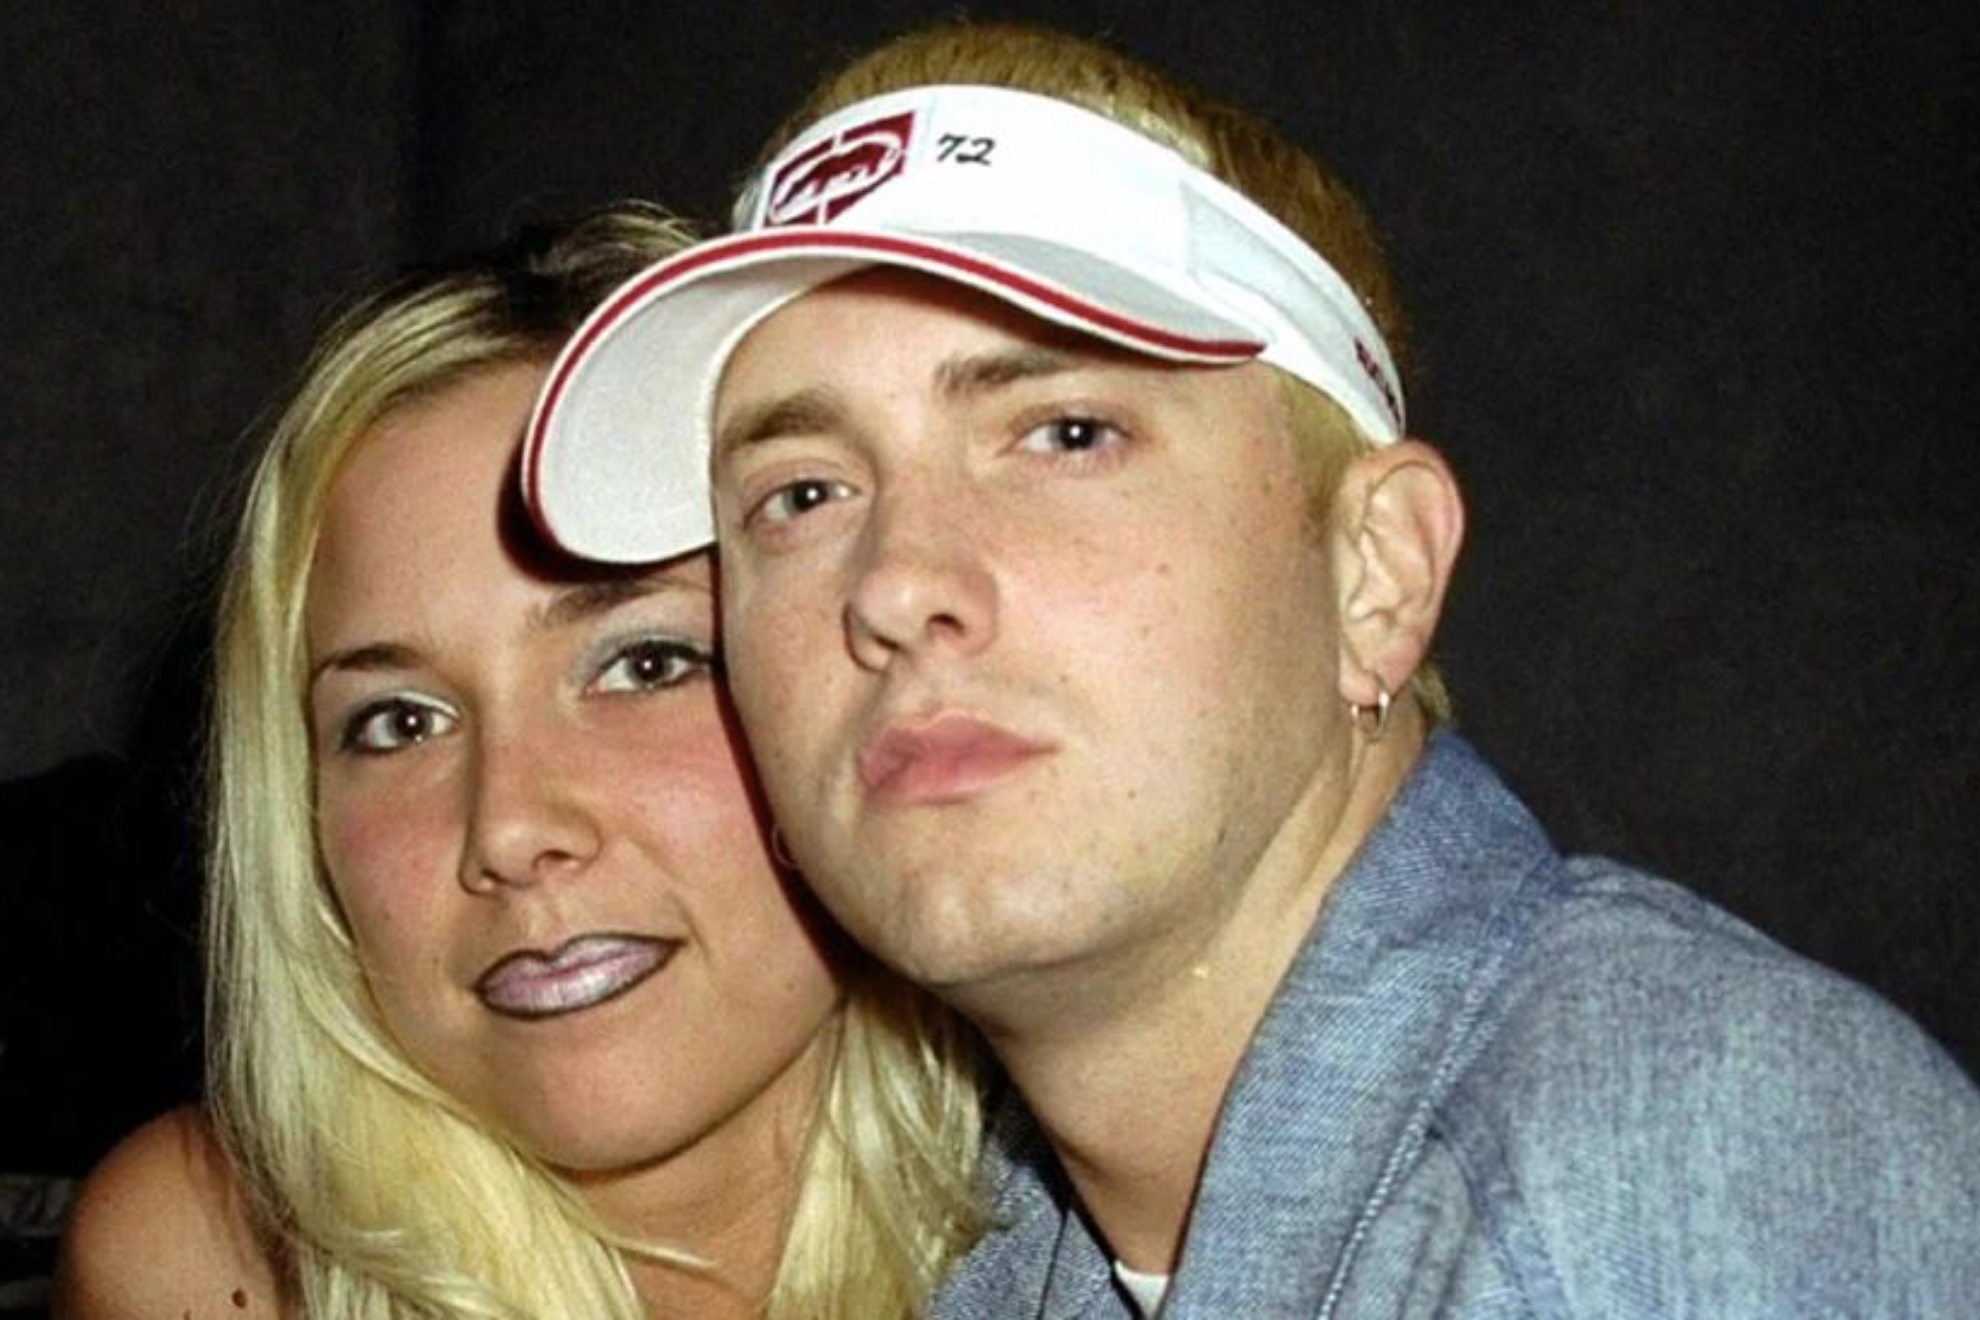 Eminem's ex-wife moves house again after succulent help from rapper